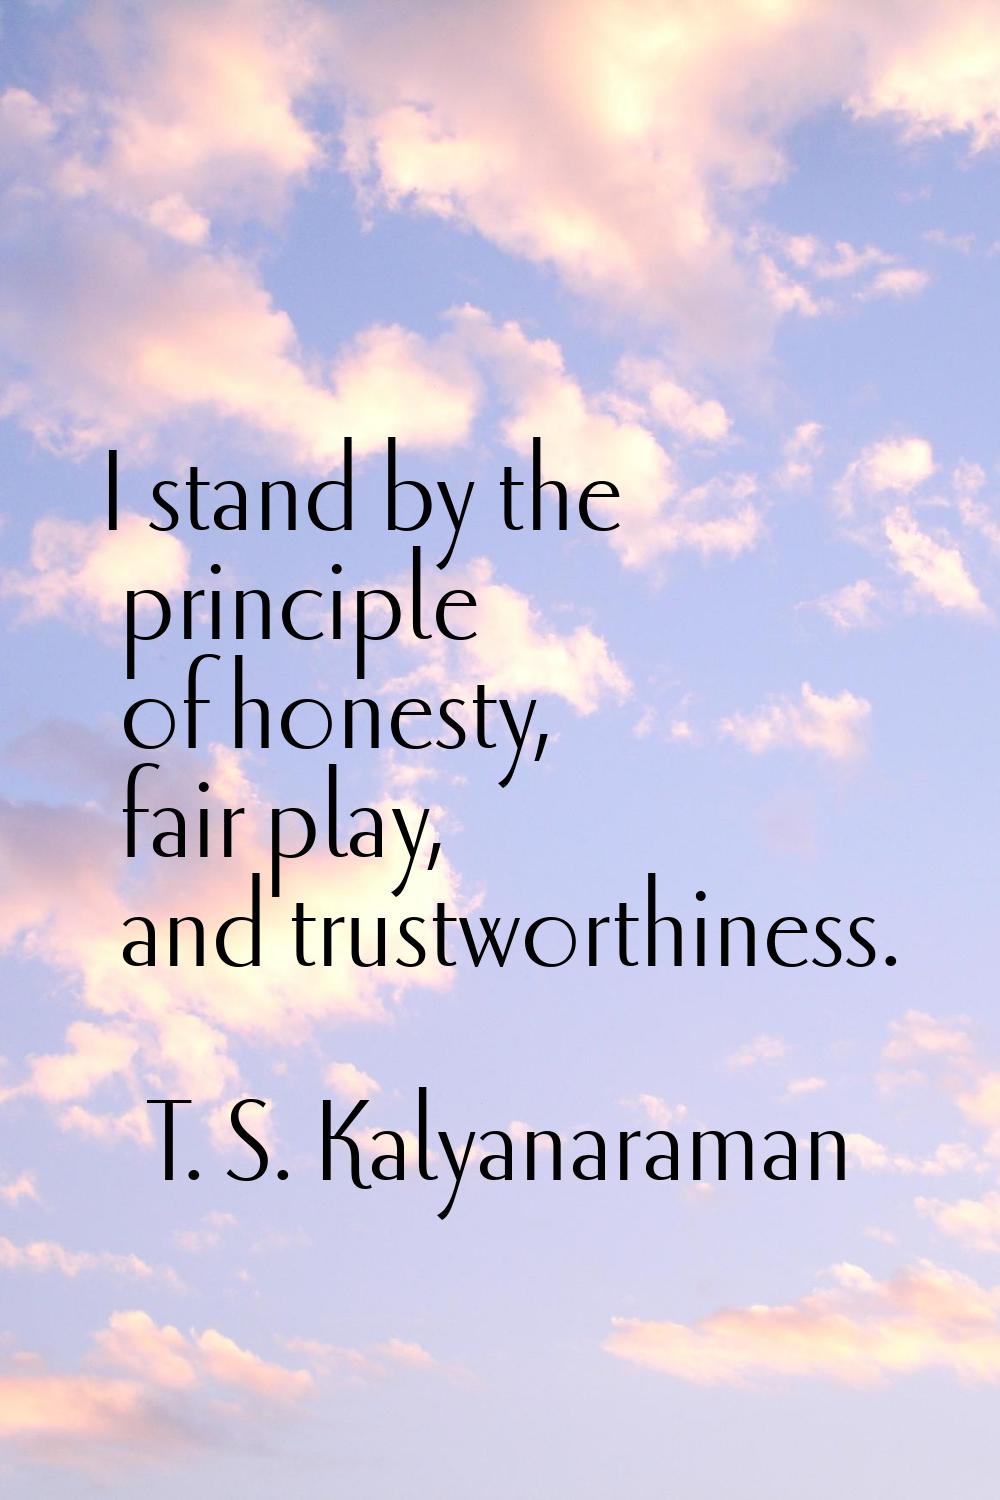 I stand by the principle of honesty, fair play, and trustworthiness.